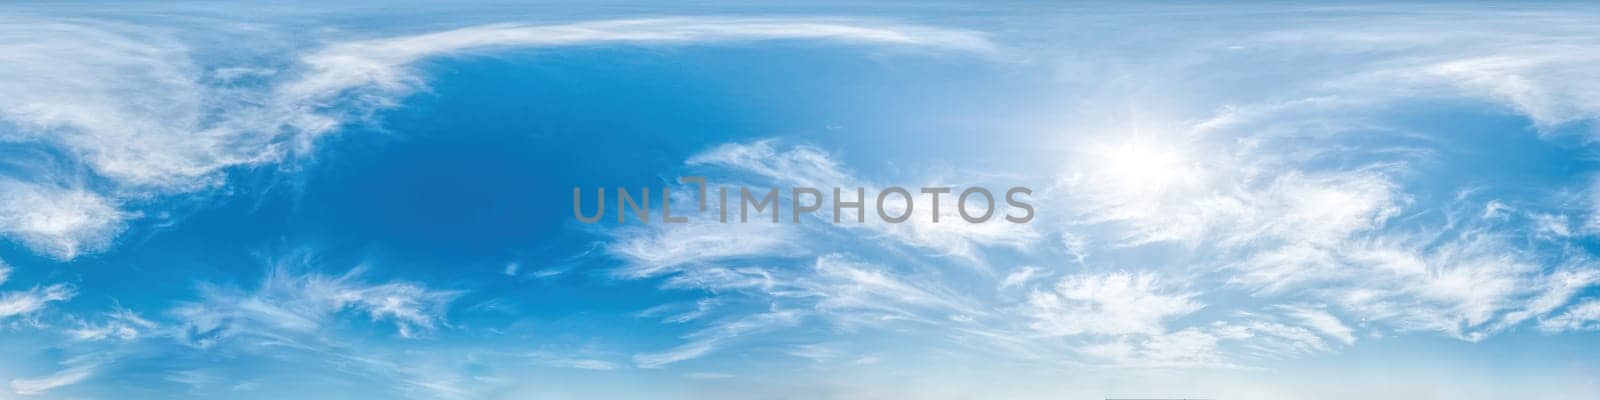 Blue sky with light clouds Seamless panorama in spherical equirectangular format with complete zenith for use in 3D graphics, game and for composites in aerial drone 360 degree panoramas as a sky dome.